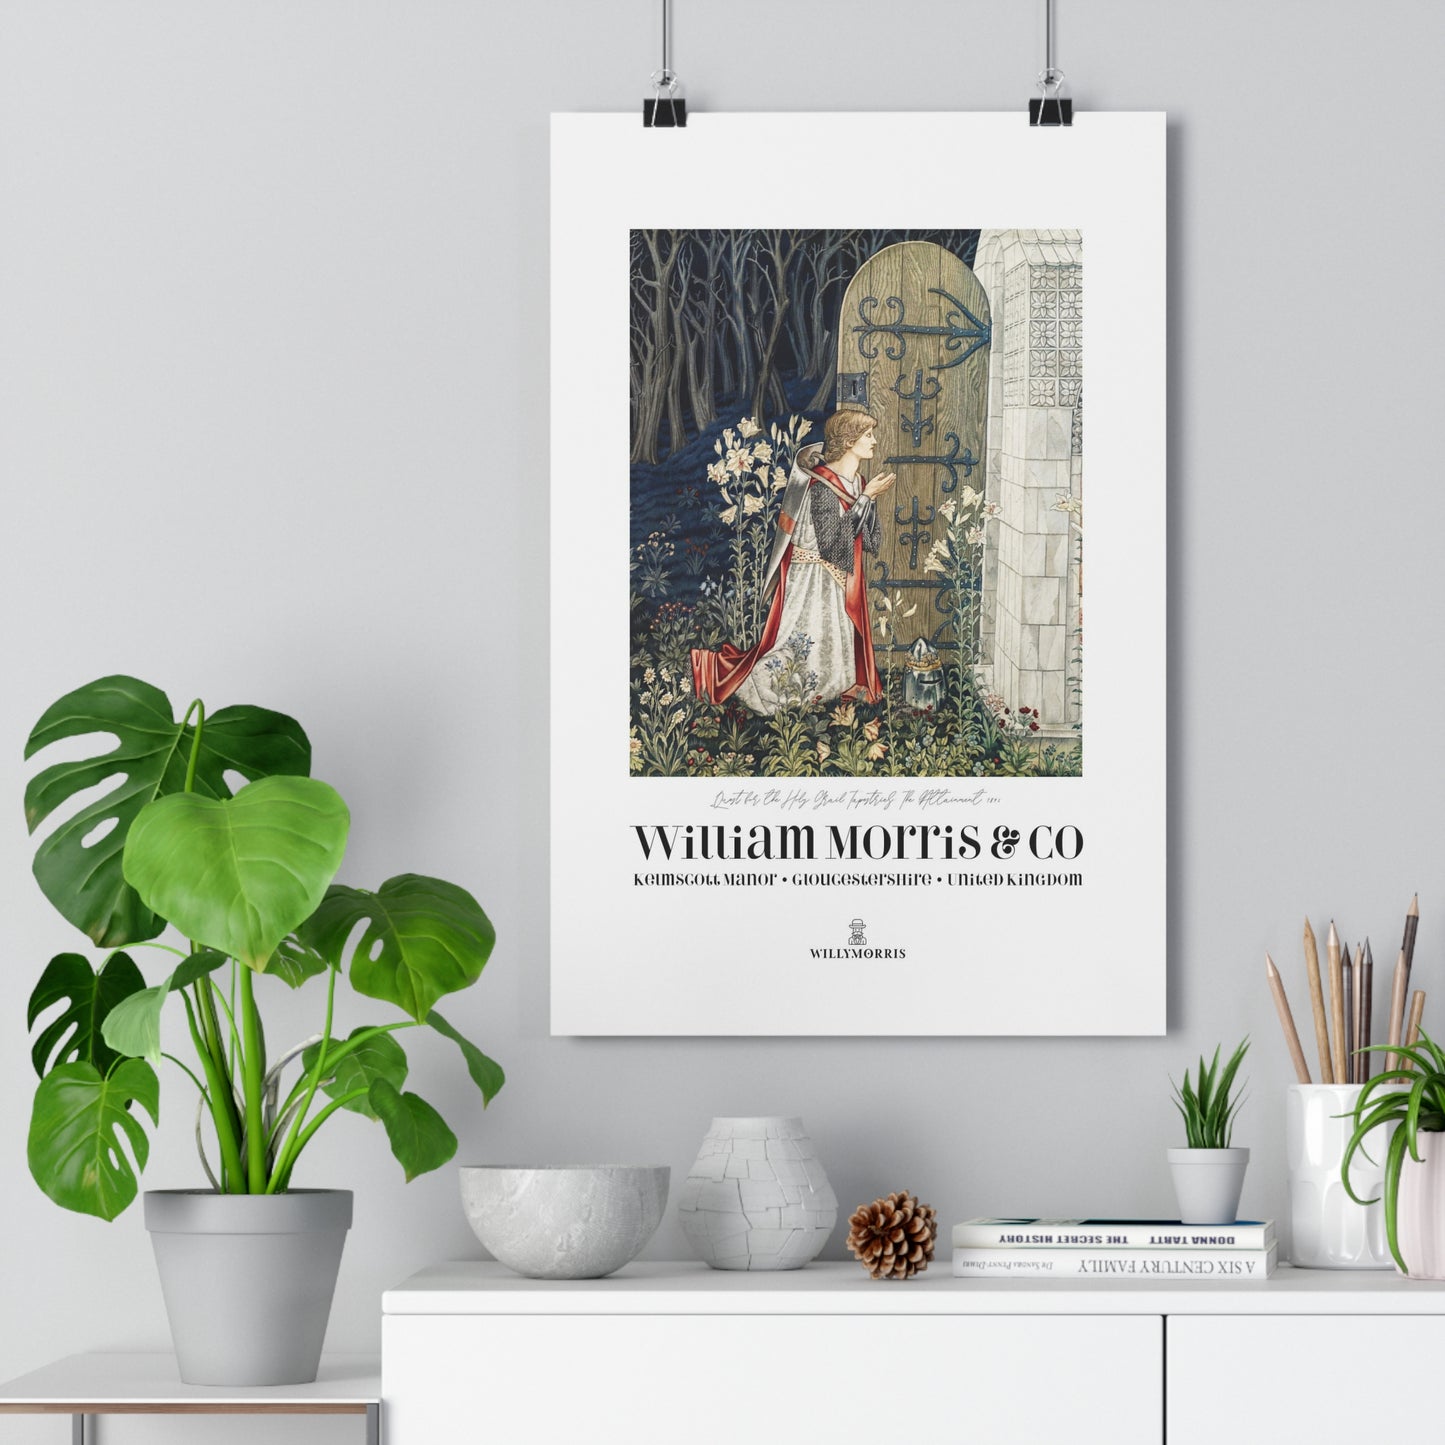 William Morris & Co Giclée Art Print - Quest for the Holy Grail Collection (Door)